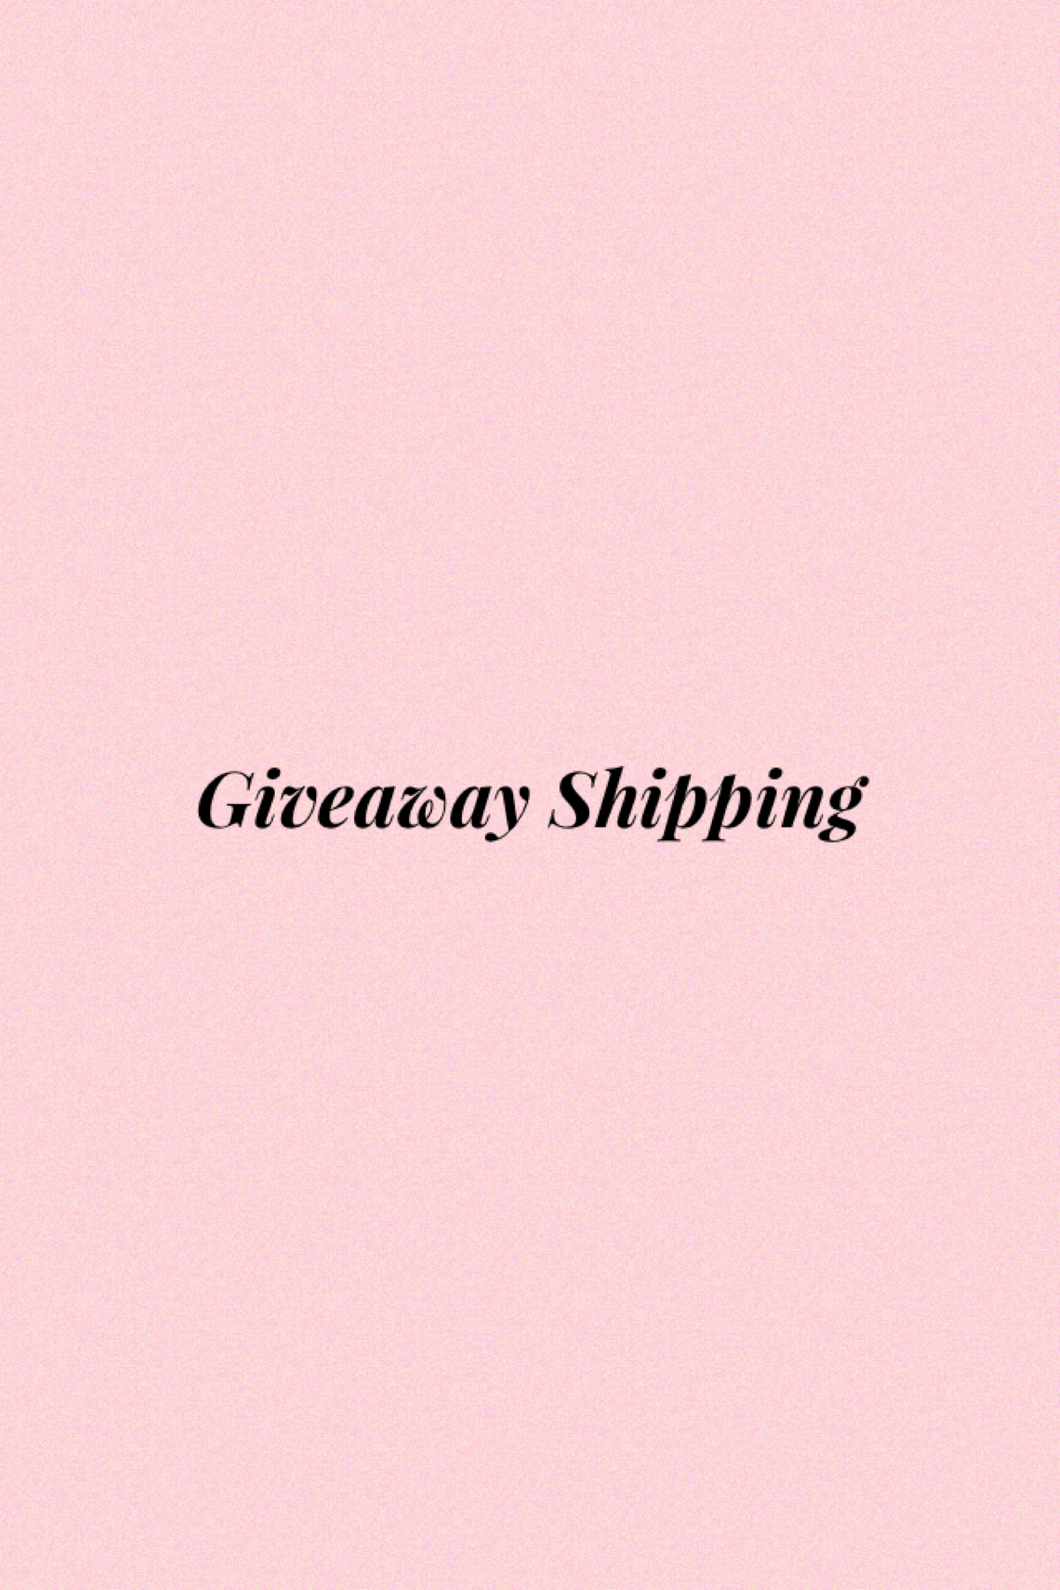 Giveaway Shipping